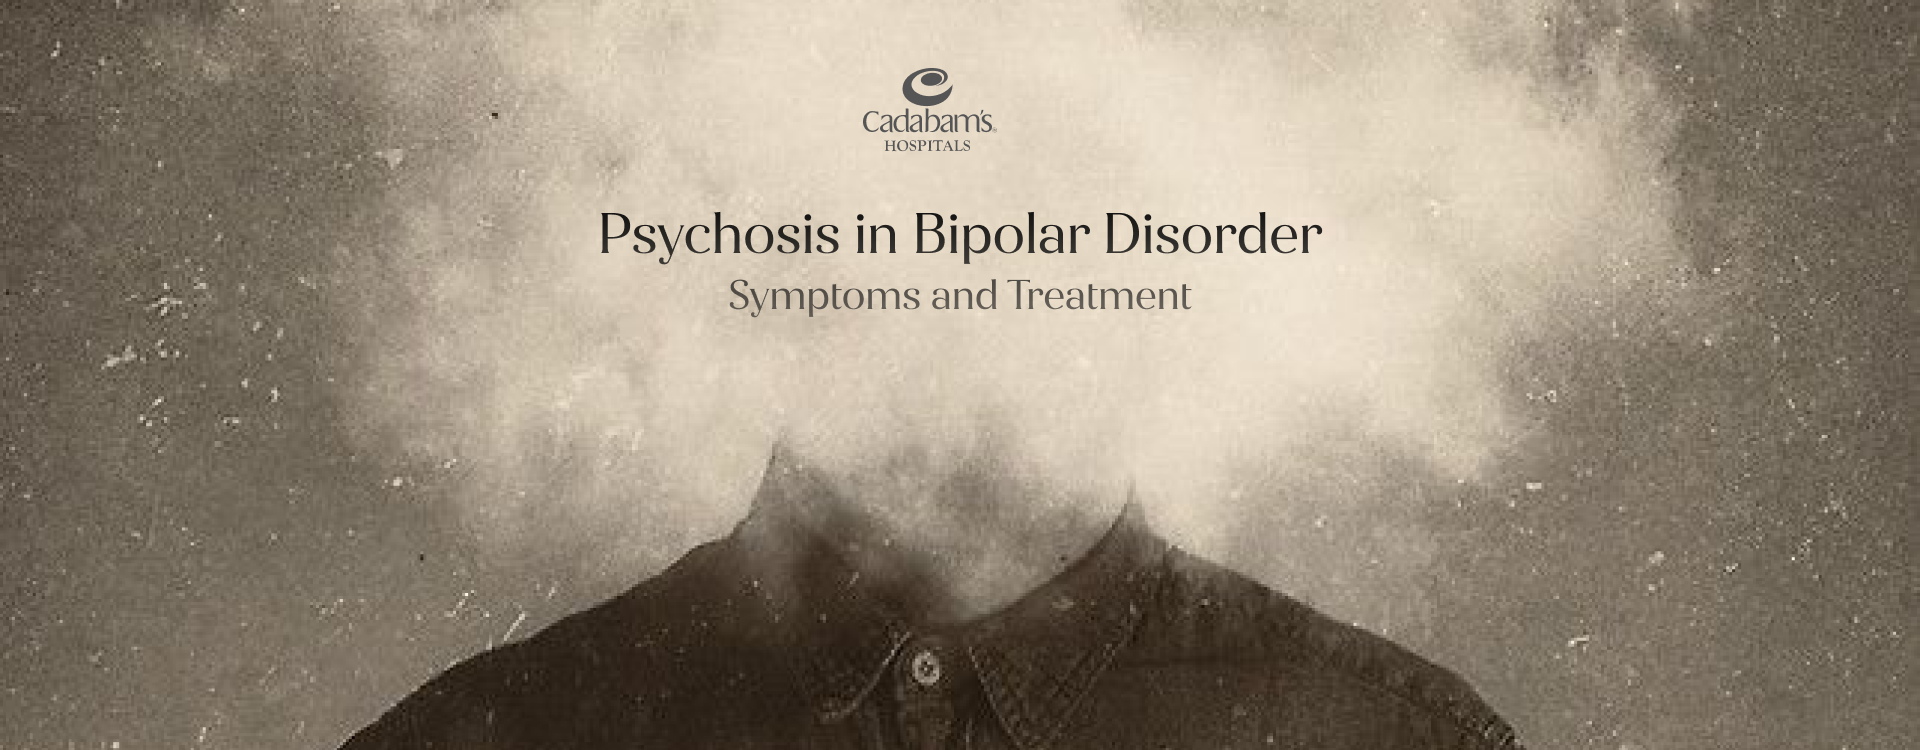 Understanding Bipolar Psychosis: A Roadmap to Recovery